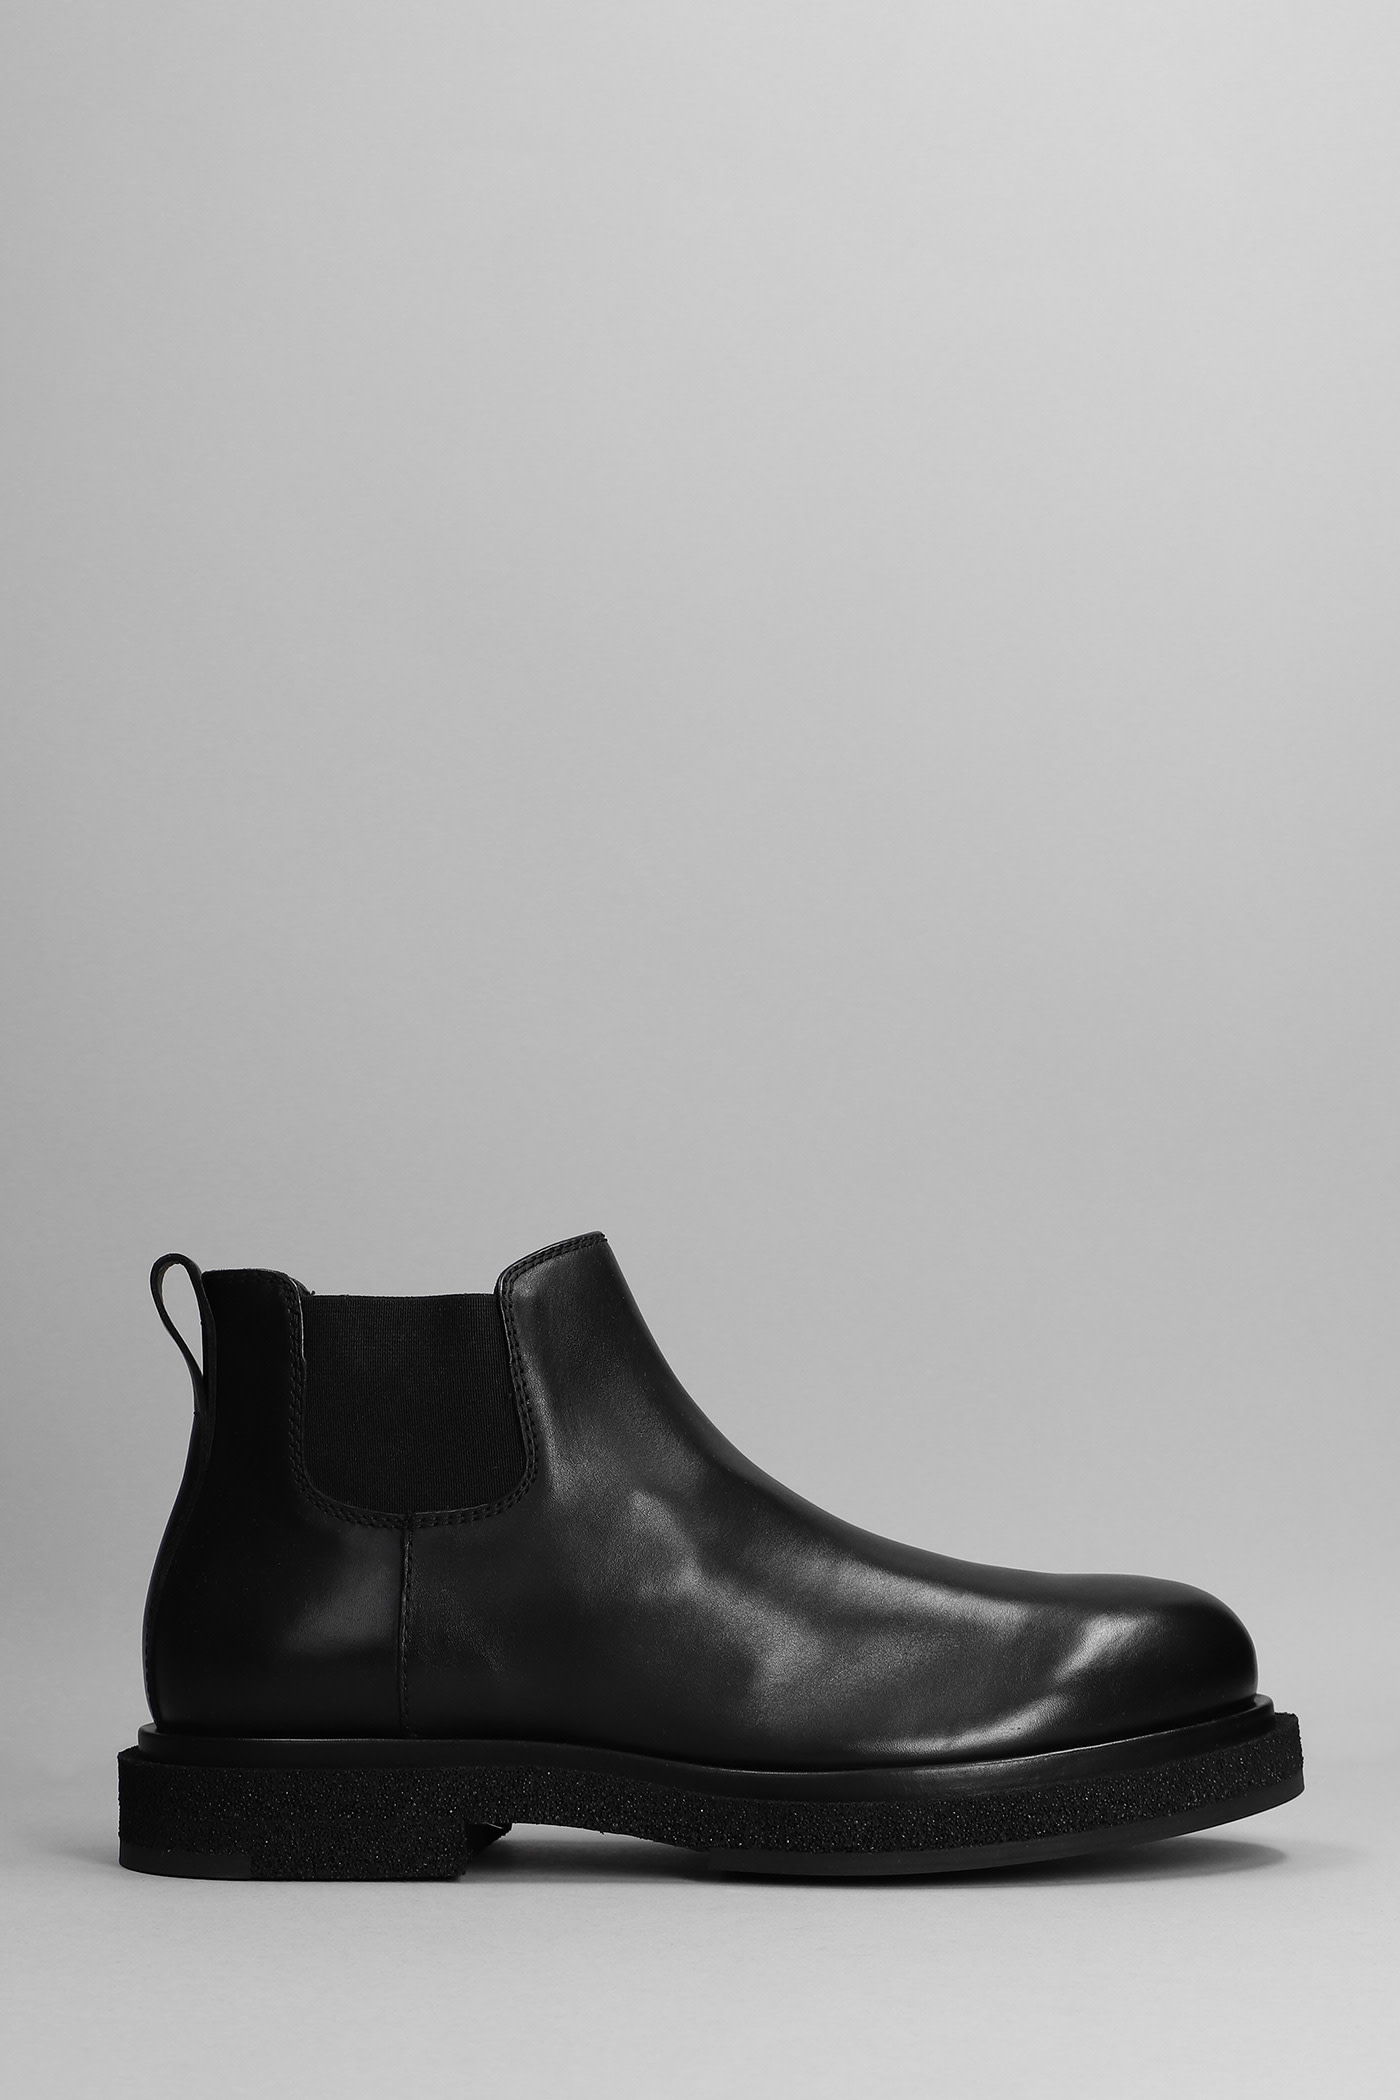 Officine Creative Tonal 003 Ankle Boots In Black Leather